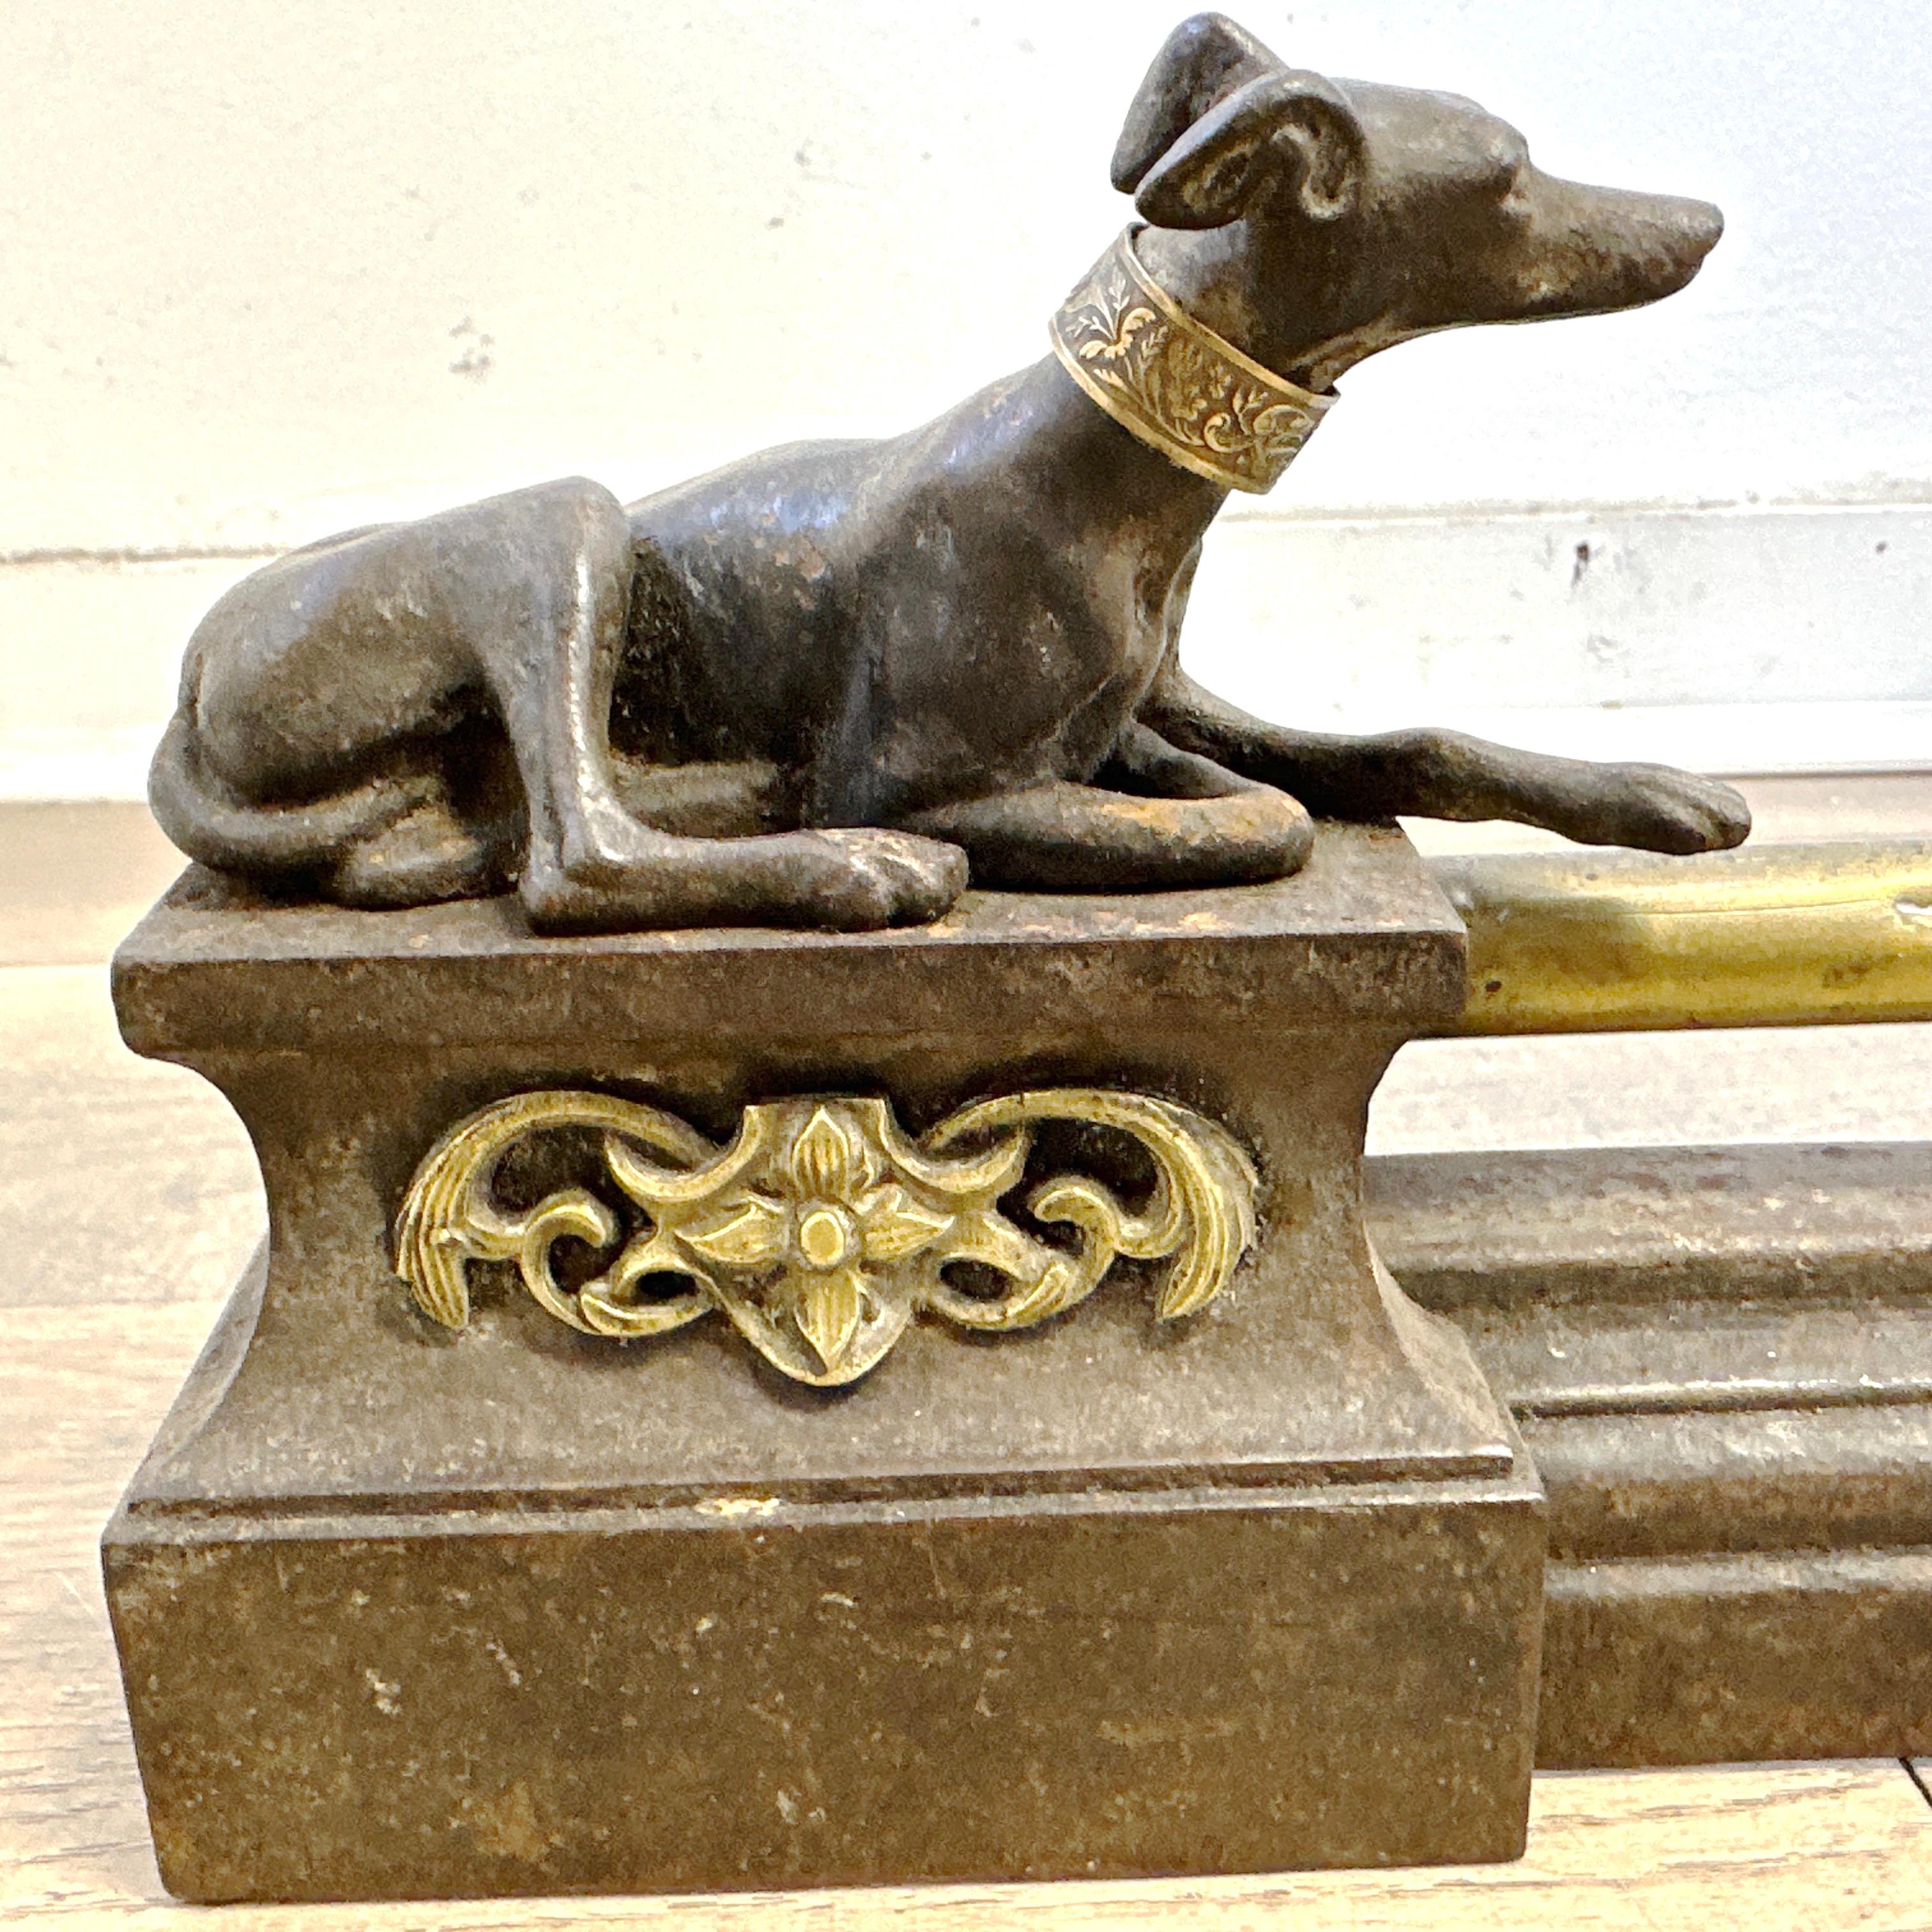 Here is an Antique French Napoleon III Greyhound Fireplace Chenet set. 

This very beautiful and old extendable fireplace bar with its 19th century cast iron log holder features two greyhounds. Each dog is lying on a base decorated with a rockery.